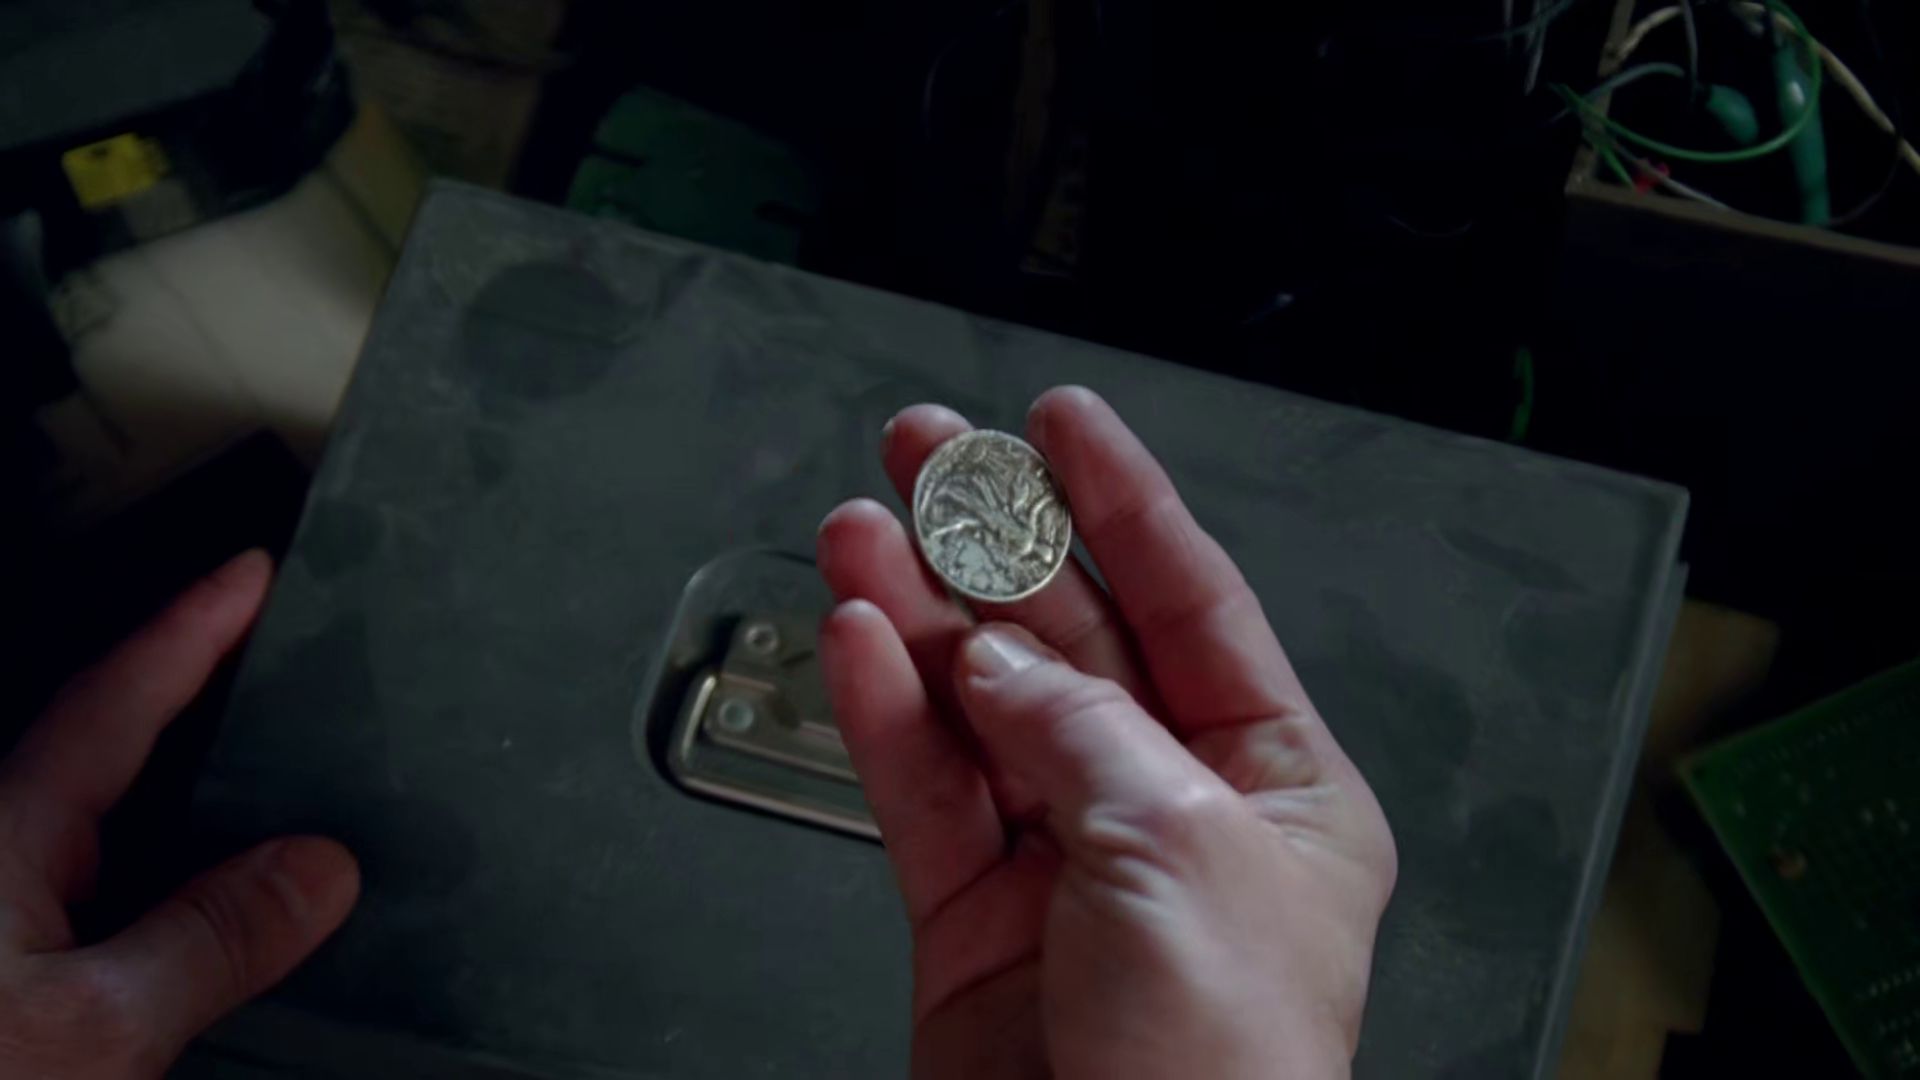 Connection: Walter found Peter's coin